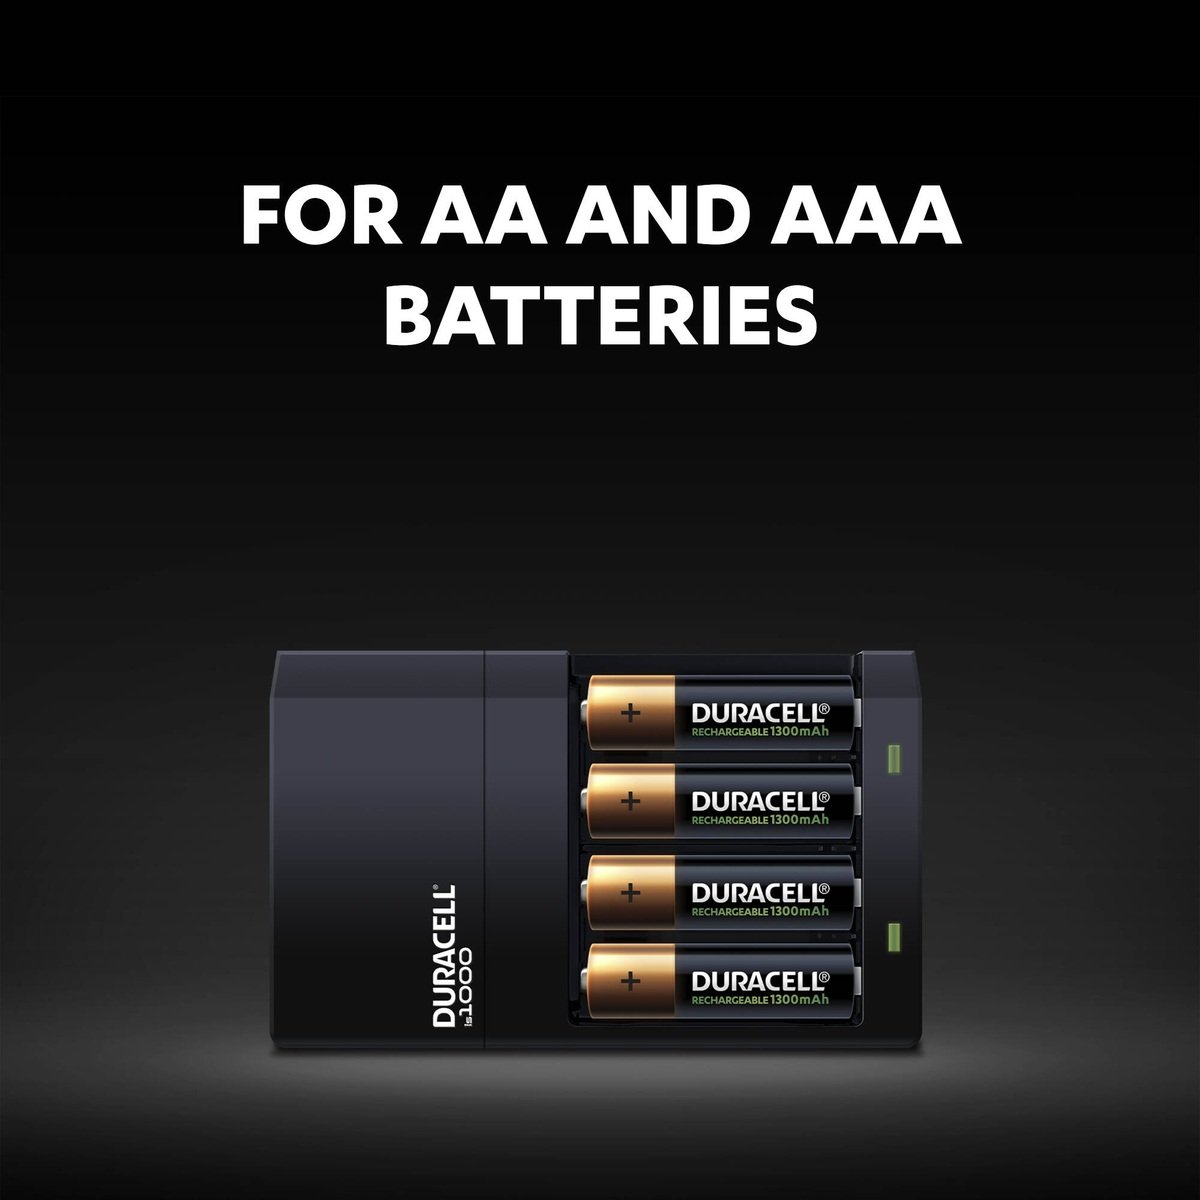 Duracell CEF27 45 minutes Charger For AA and AAA Batterys